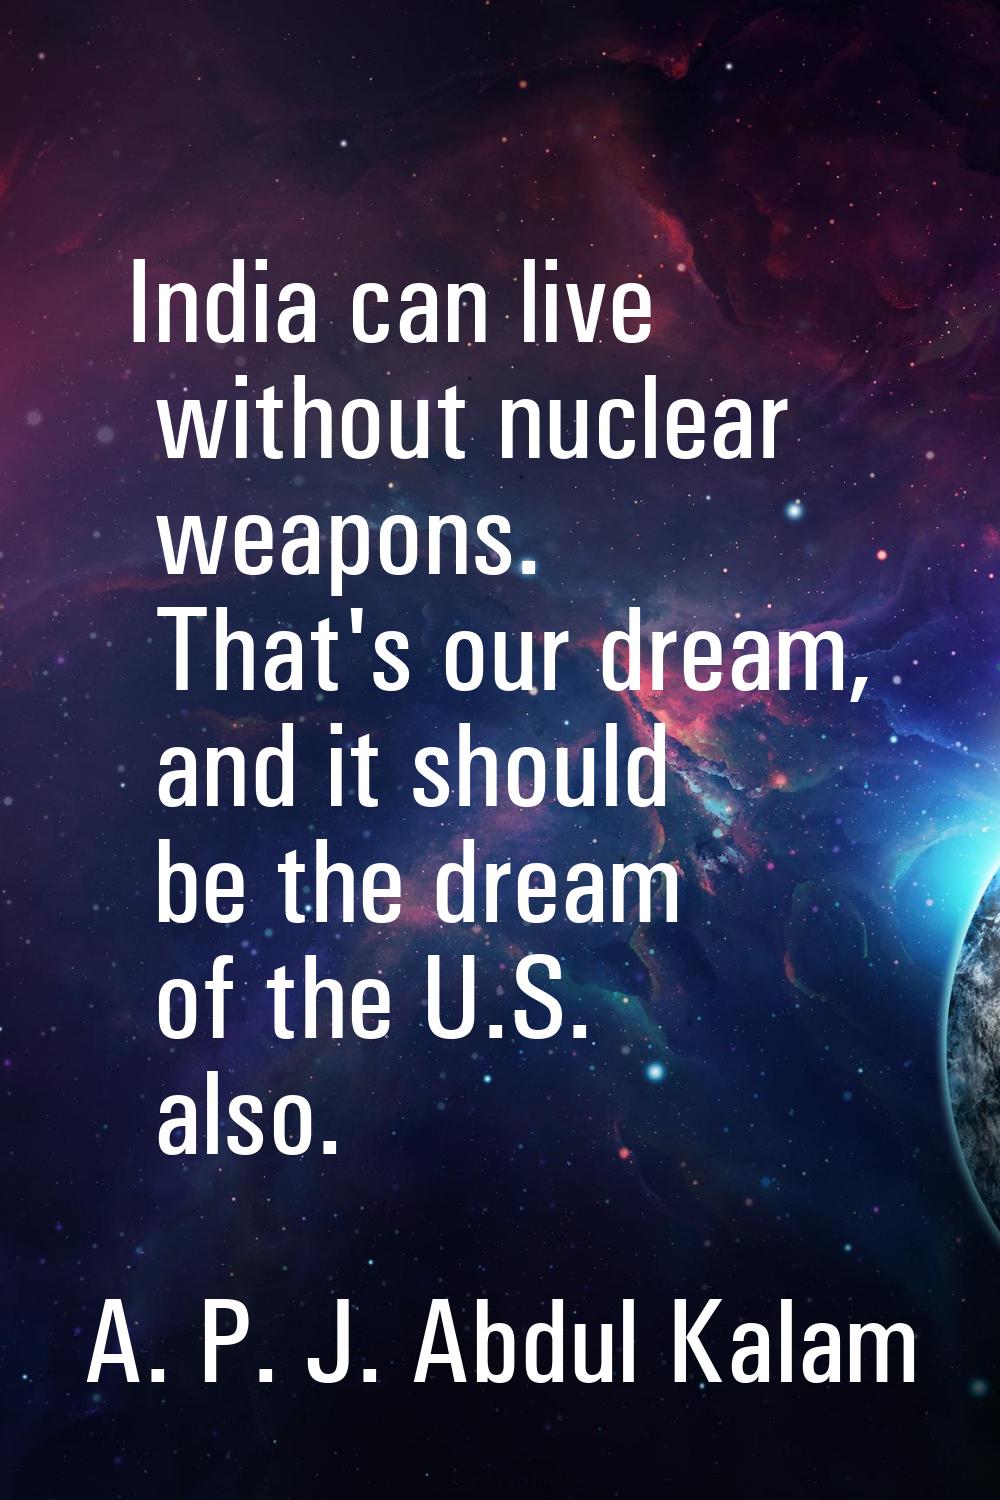 India can live without nuclear weapons. That's our dream, and it should be the dream of the U.S. al